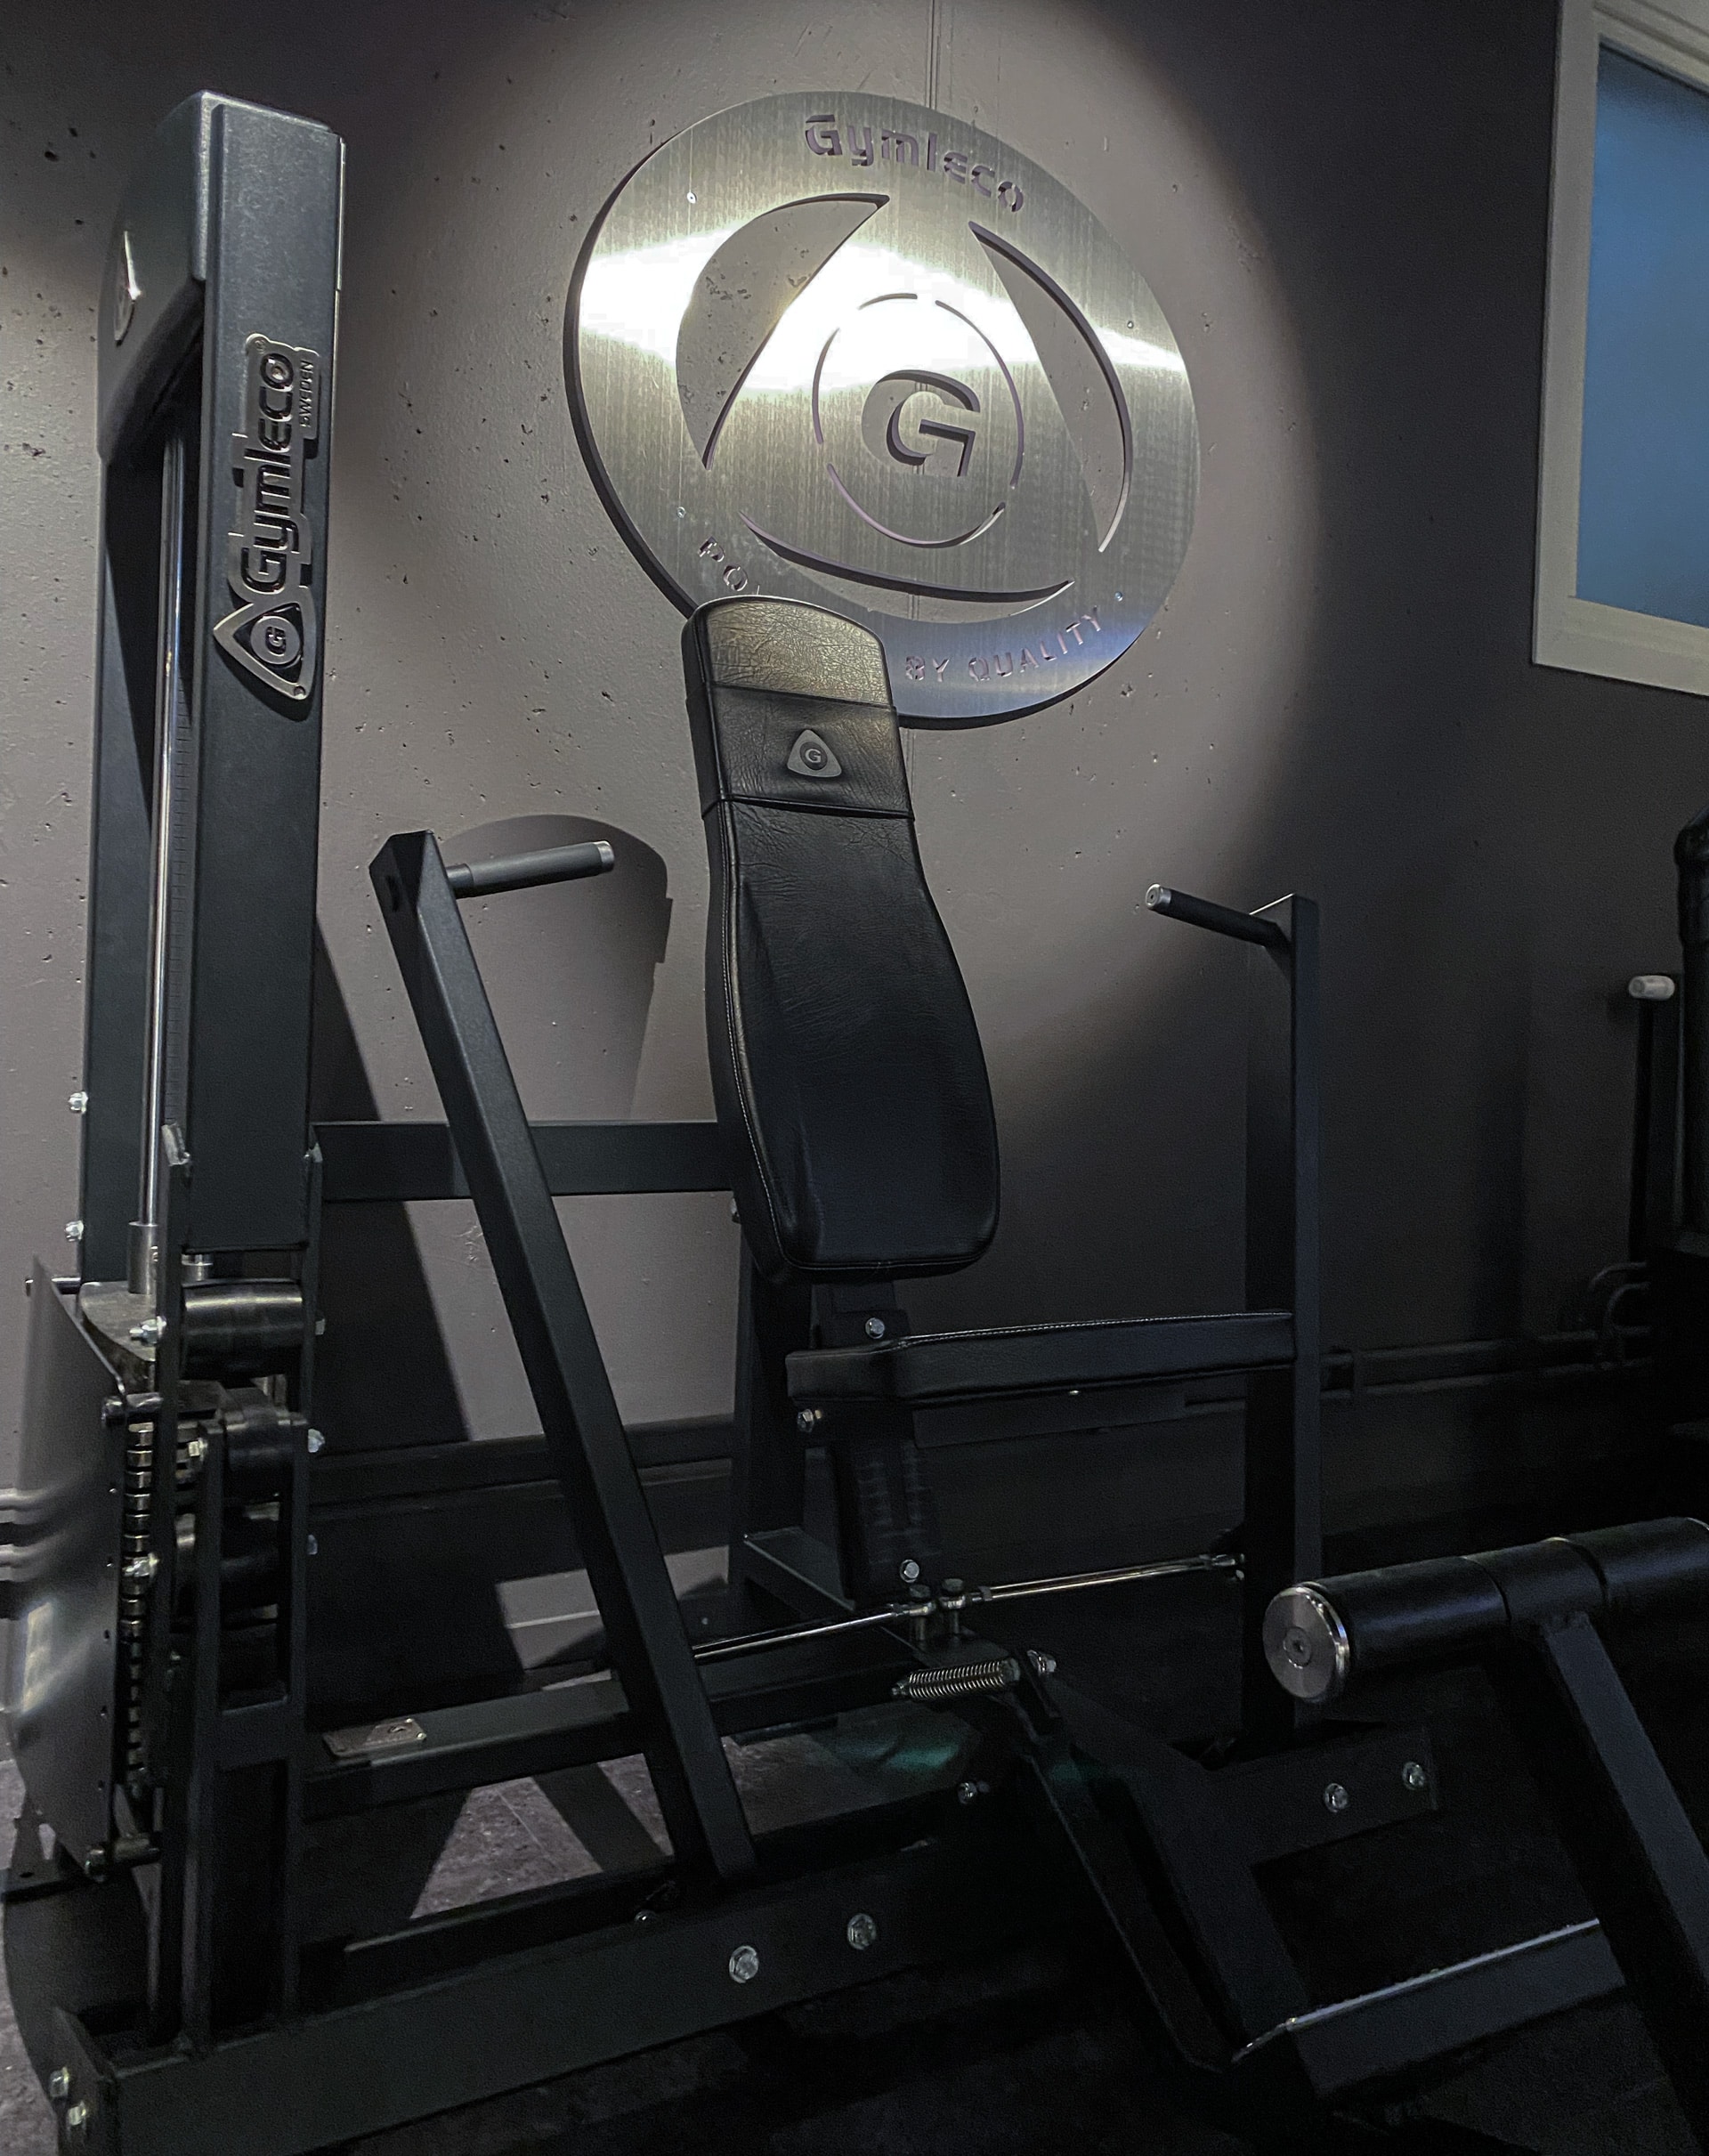 Seated Chest Press PL1201 - Supino